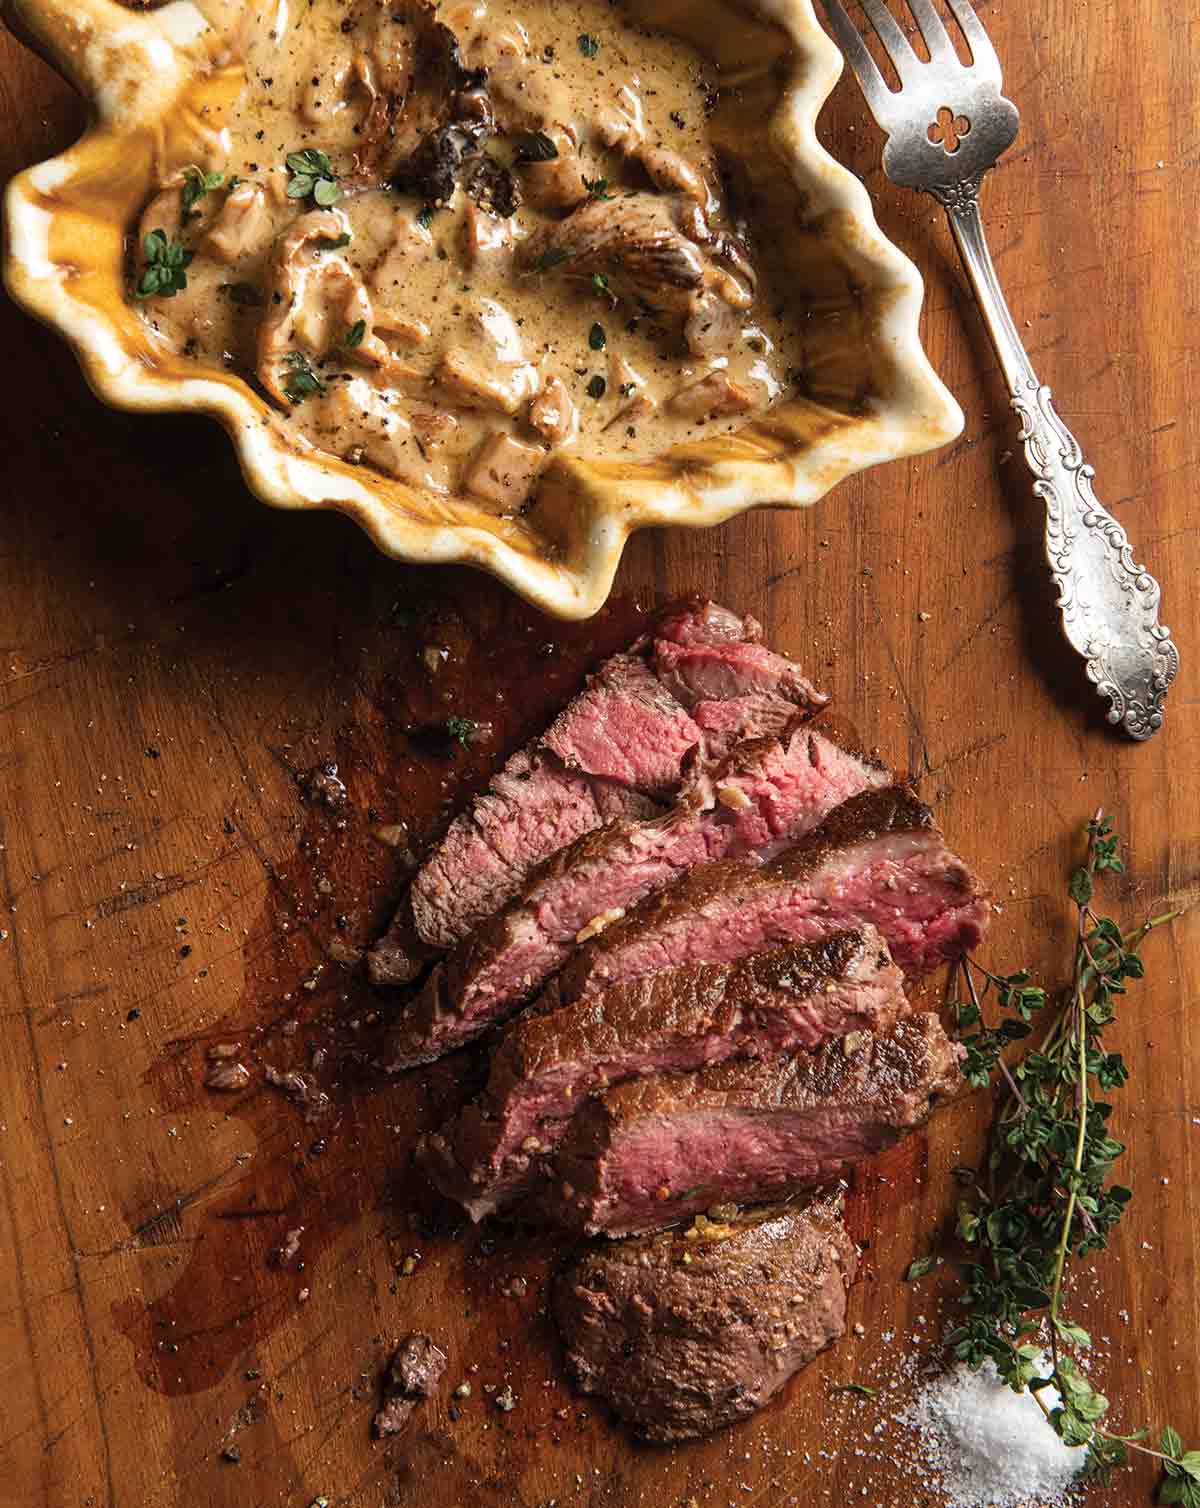 A sliced filet mignon with chanterelle marsala sauce in a bowl beside it on a wooden cutting board.